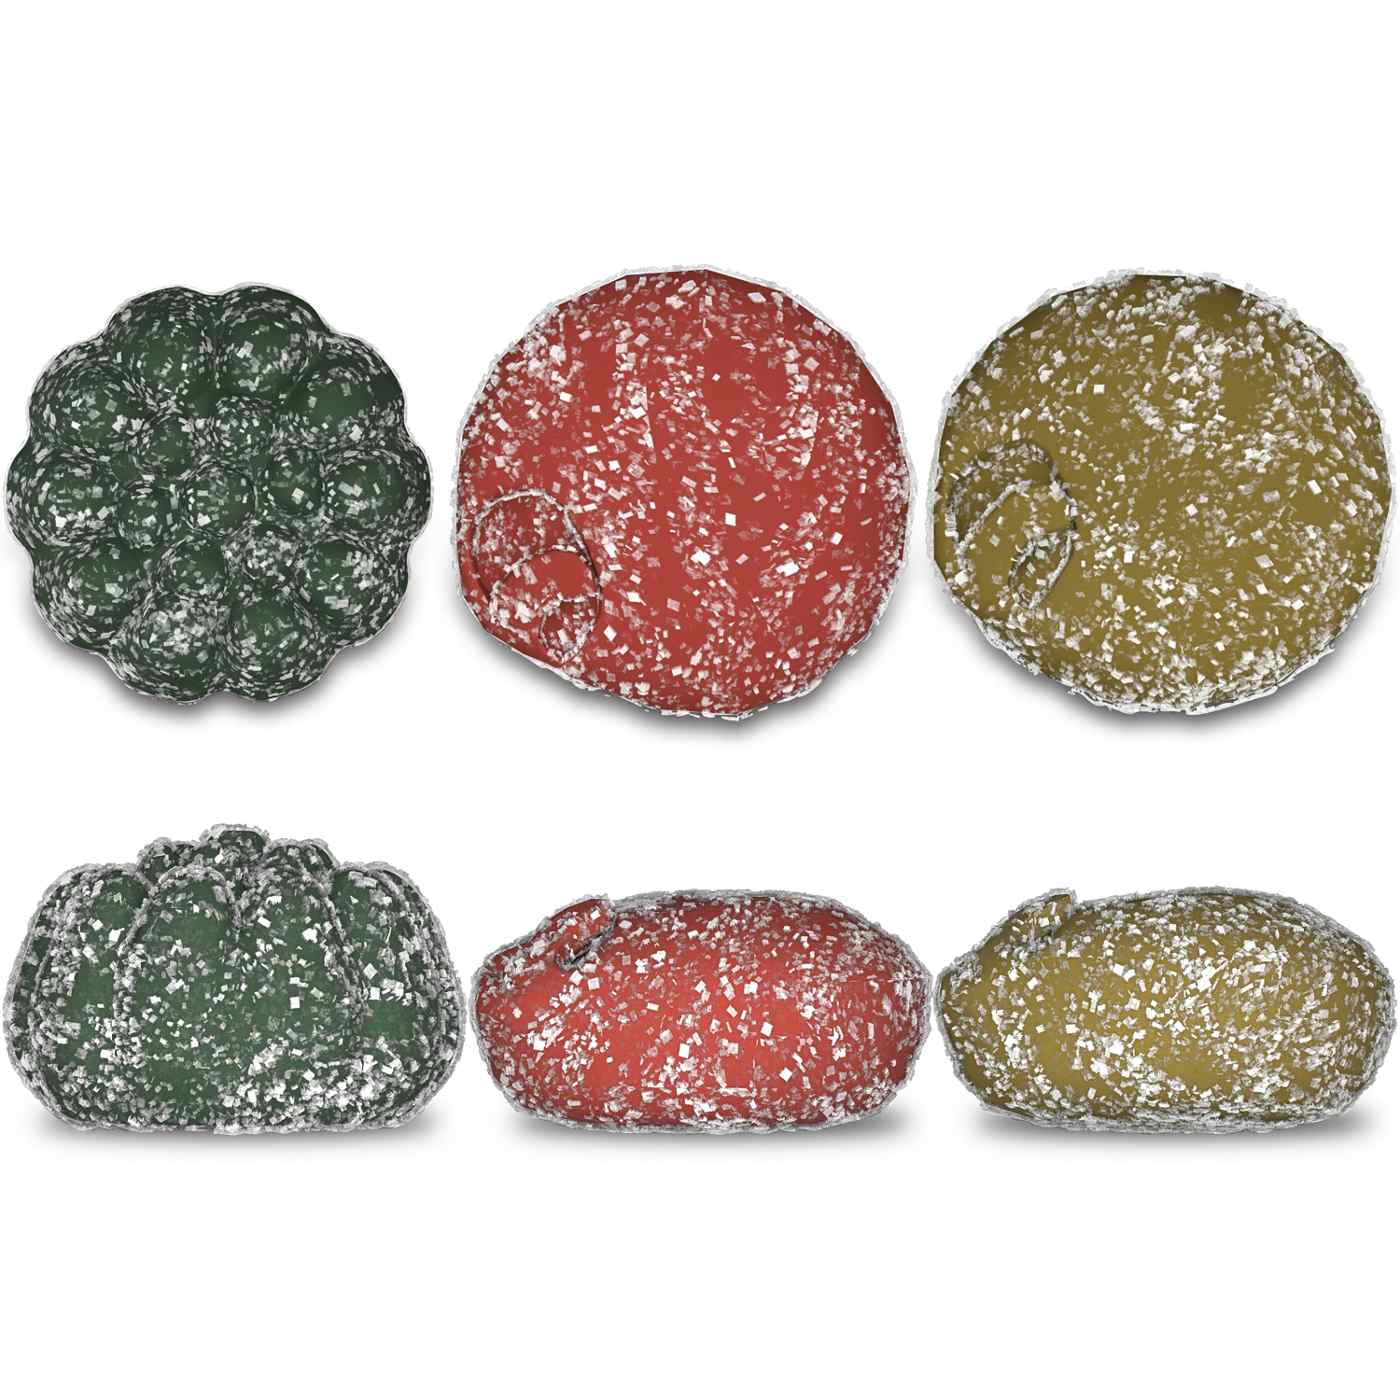 One A Day For Her VitaCraves Teen Gummies; image 4 of 6